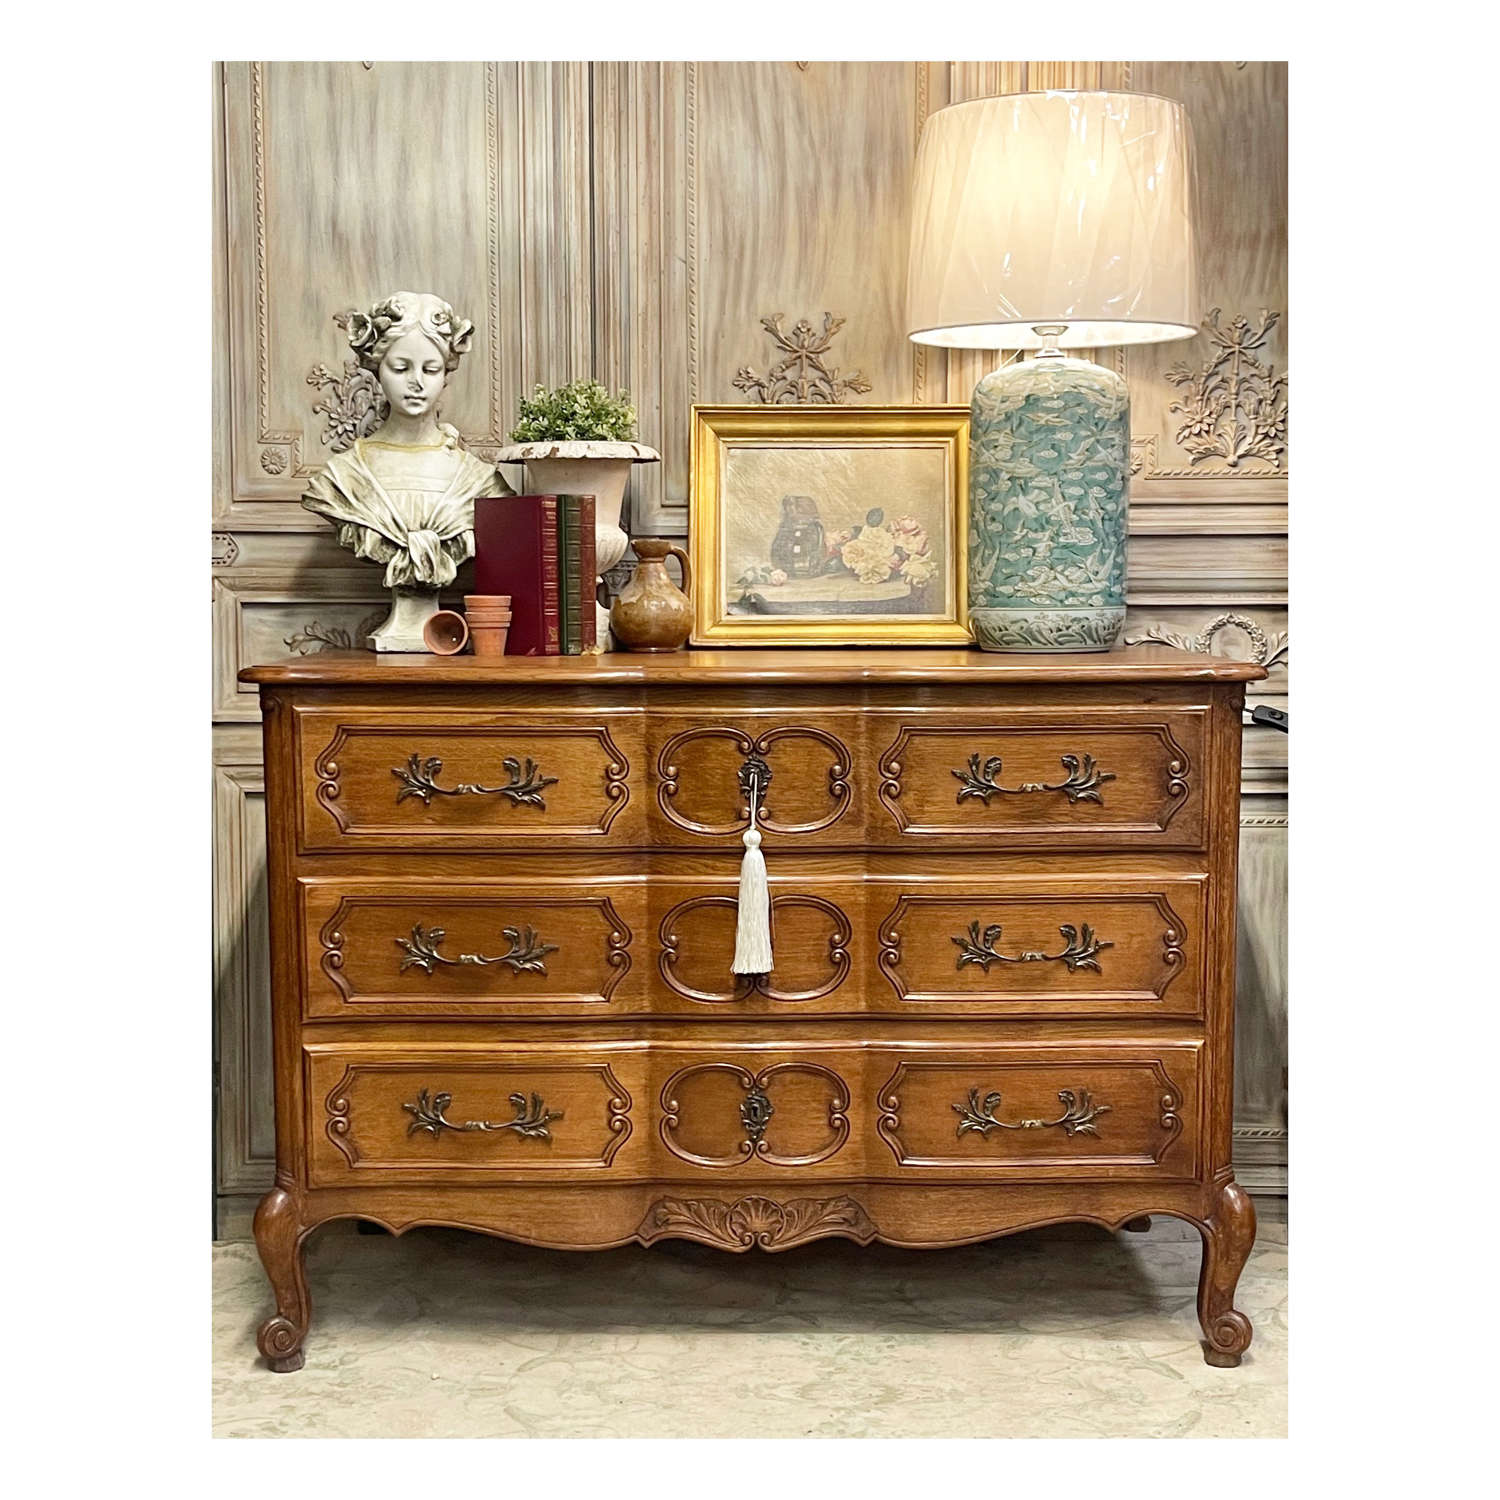 Ornate carved French chest of drawers